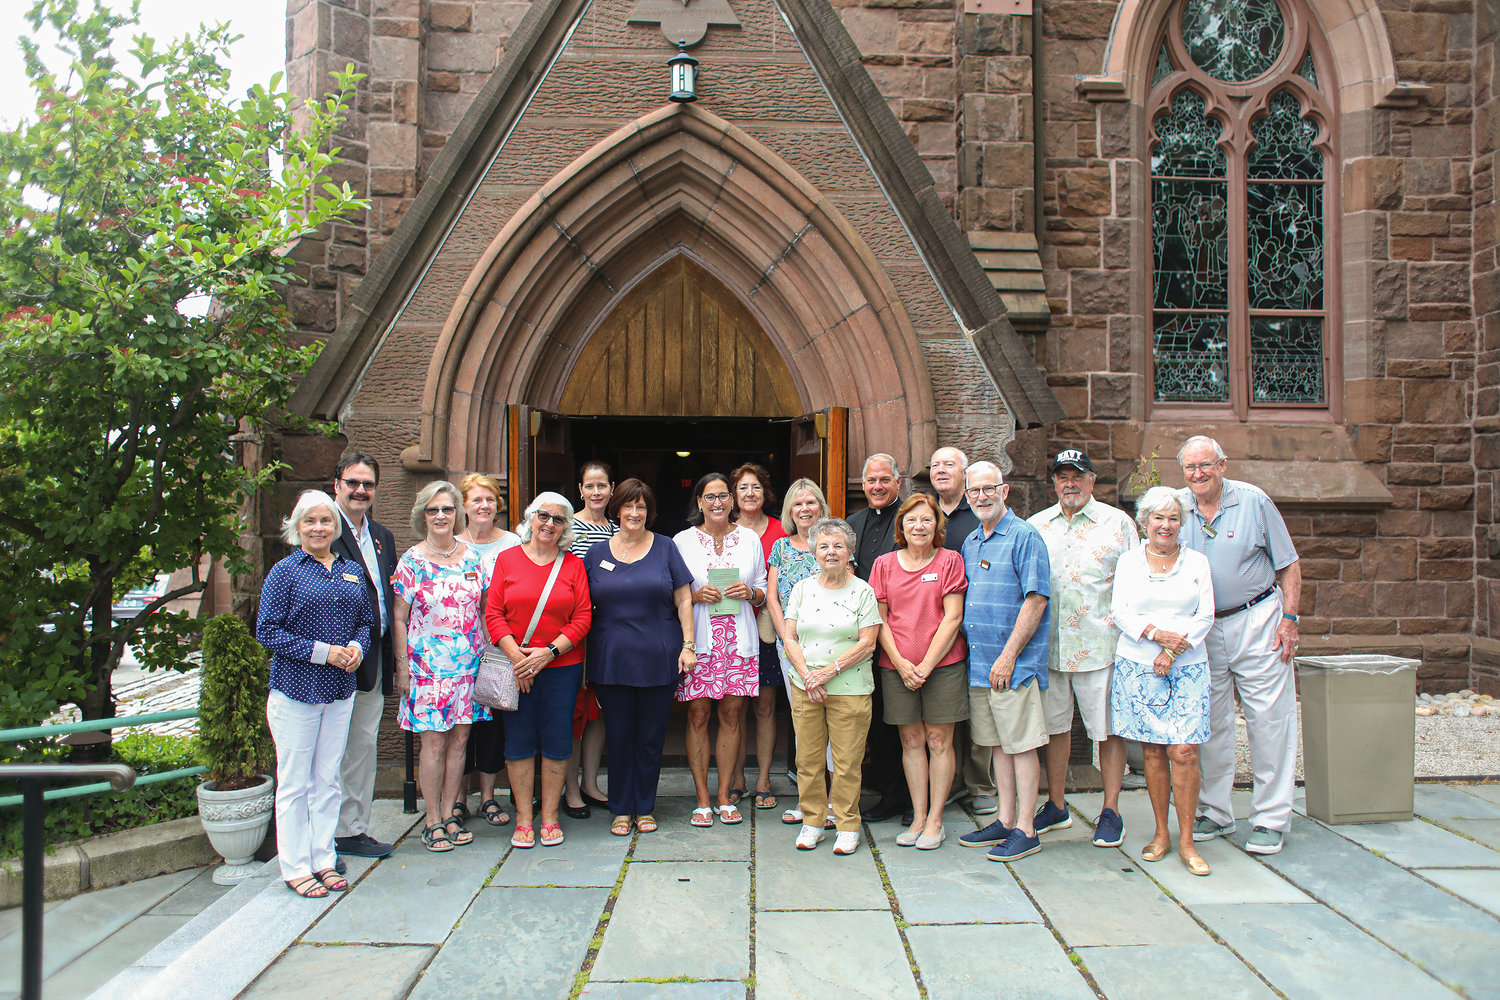 Since June, more than 300 new faces have been stopping by the historic St. Mary’s Church in Newport each week. This increased traffic is all thanks to the parish’s new Ambassadors Club. Thanks to the presence of passionate and dedicated volunteers, these ambassadors of the faith help to keep their church doors open throughout the week for tourists, curious locals and other parishioners by spending an hour or two each day greeting visitors who come to pray and to learn more about this holy and historic landmark in the City by the Sea.